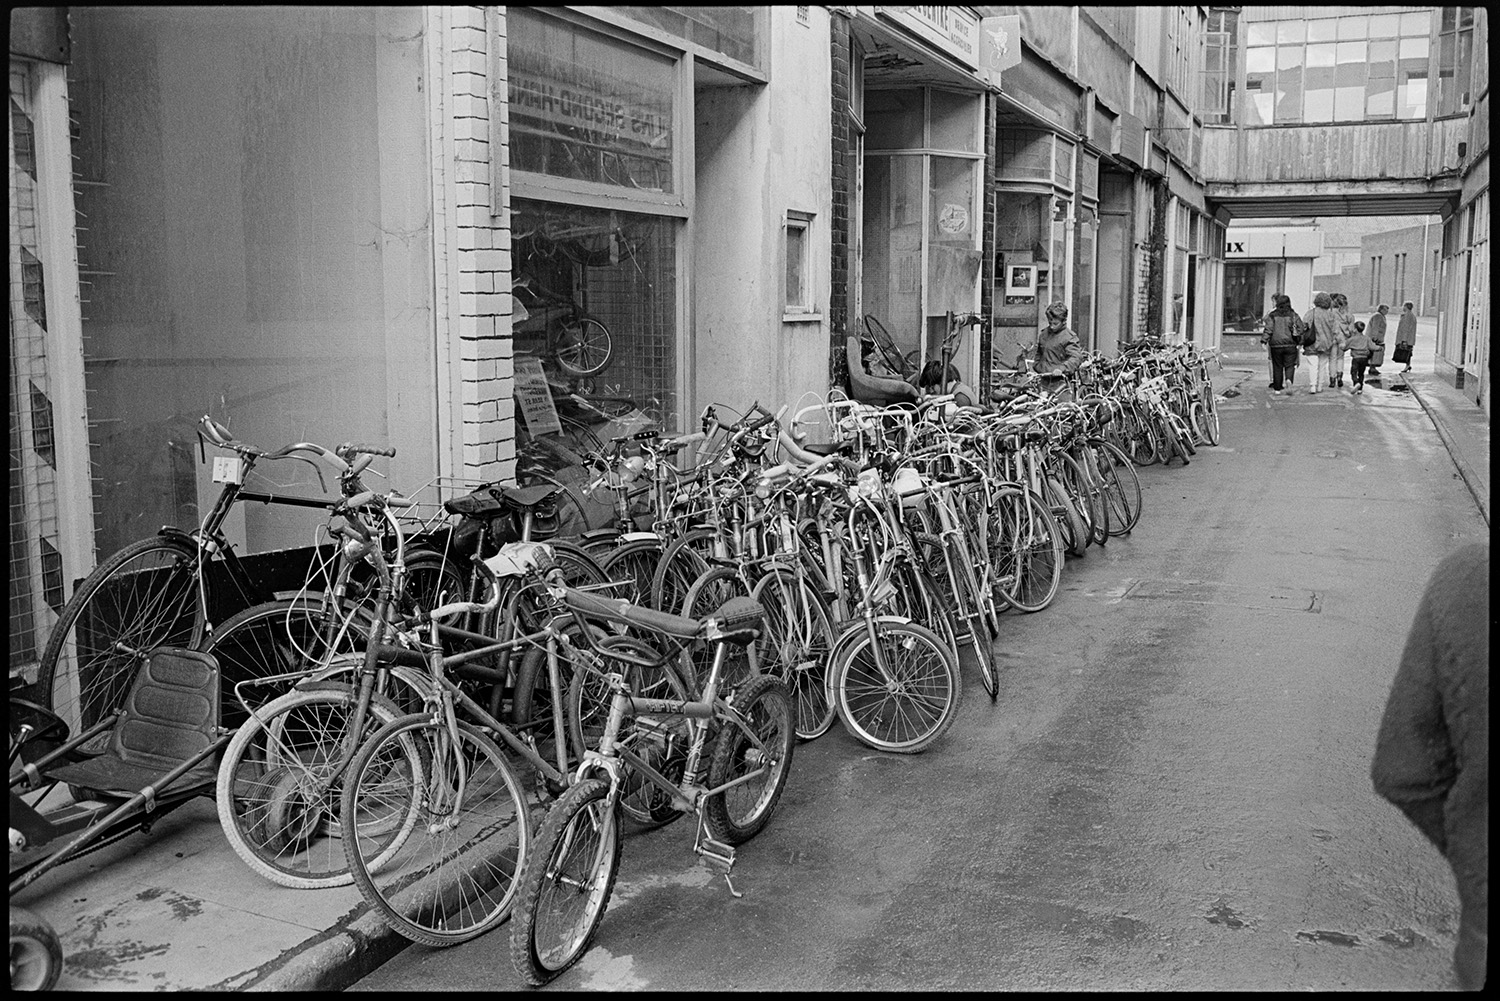 Rows of bicycles stacked outside shop fronts in a shopping arcade off Bear Street, Barnstaple. There are pedestrians at the end of the arcade.